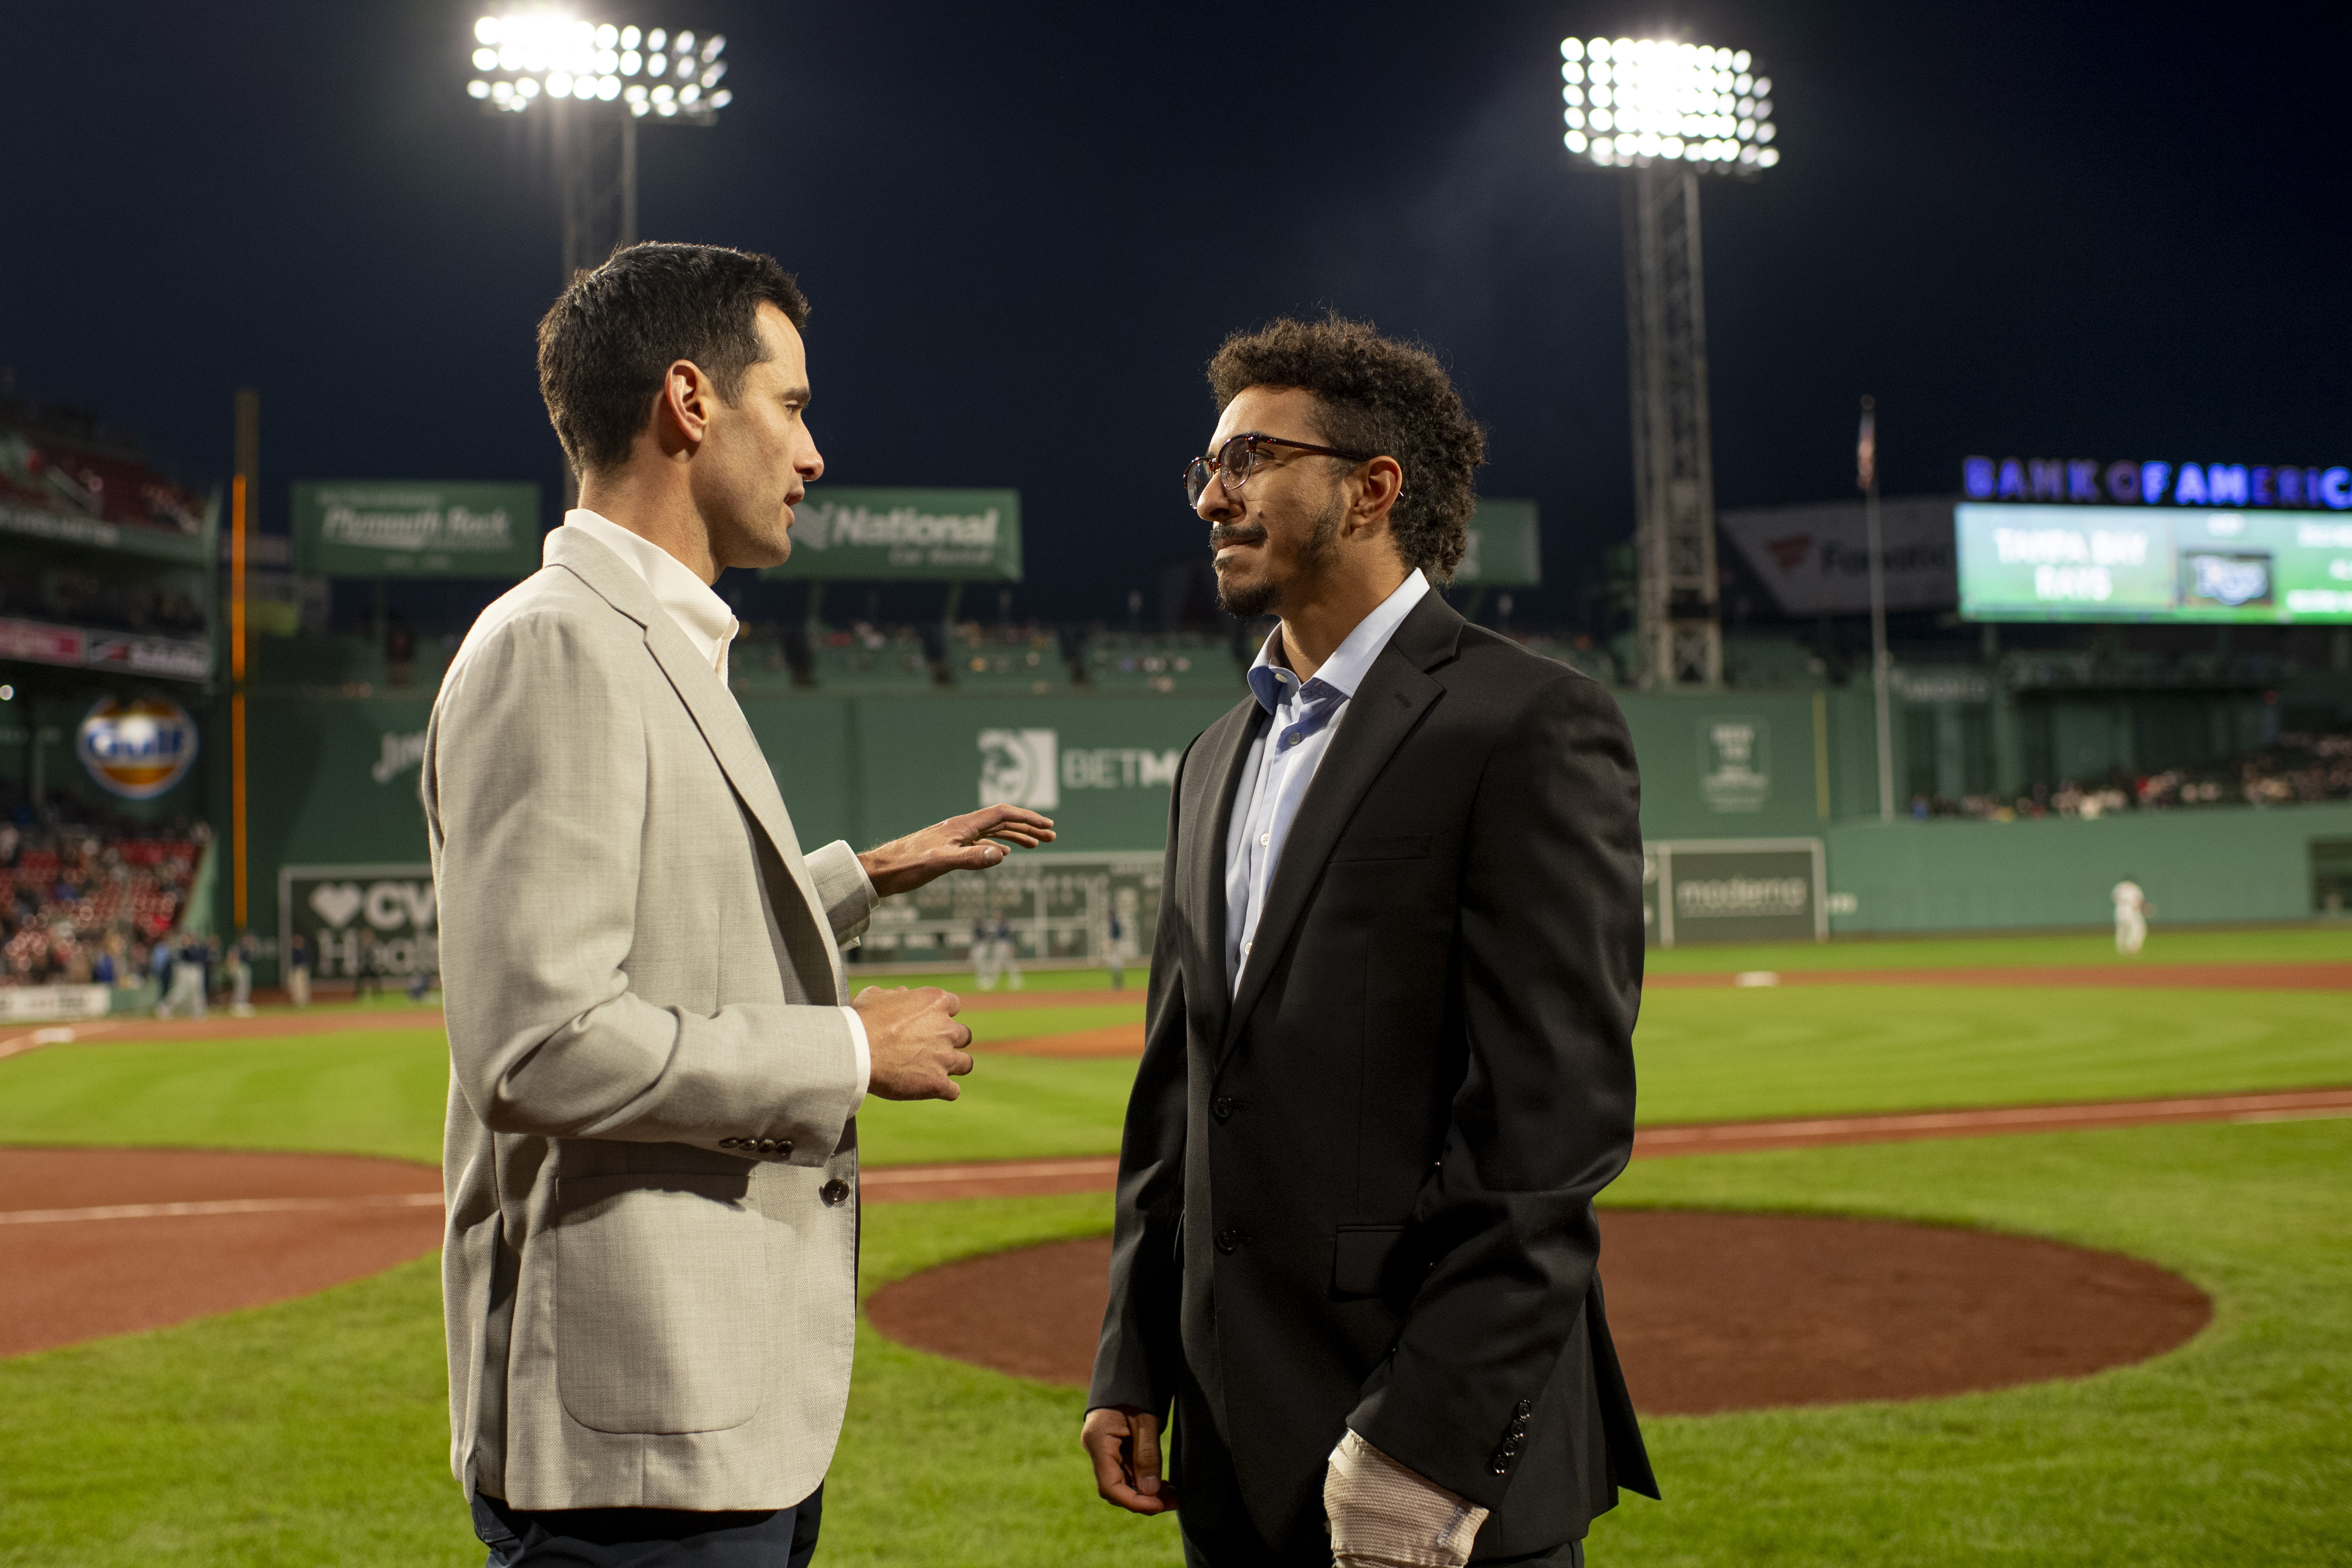 Report: Potential candidates for Red Sox GM job have some